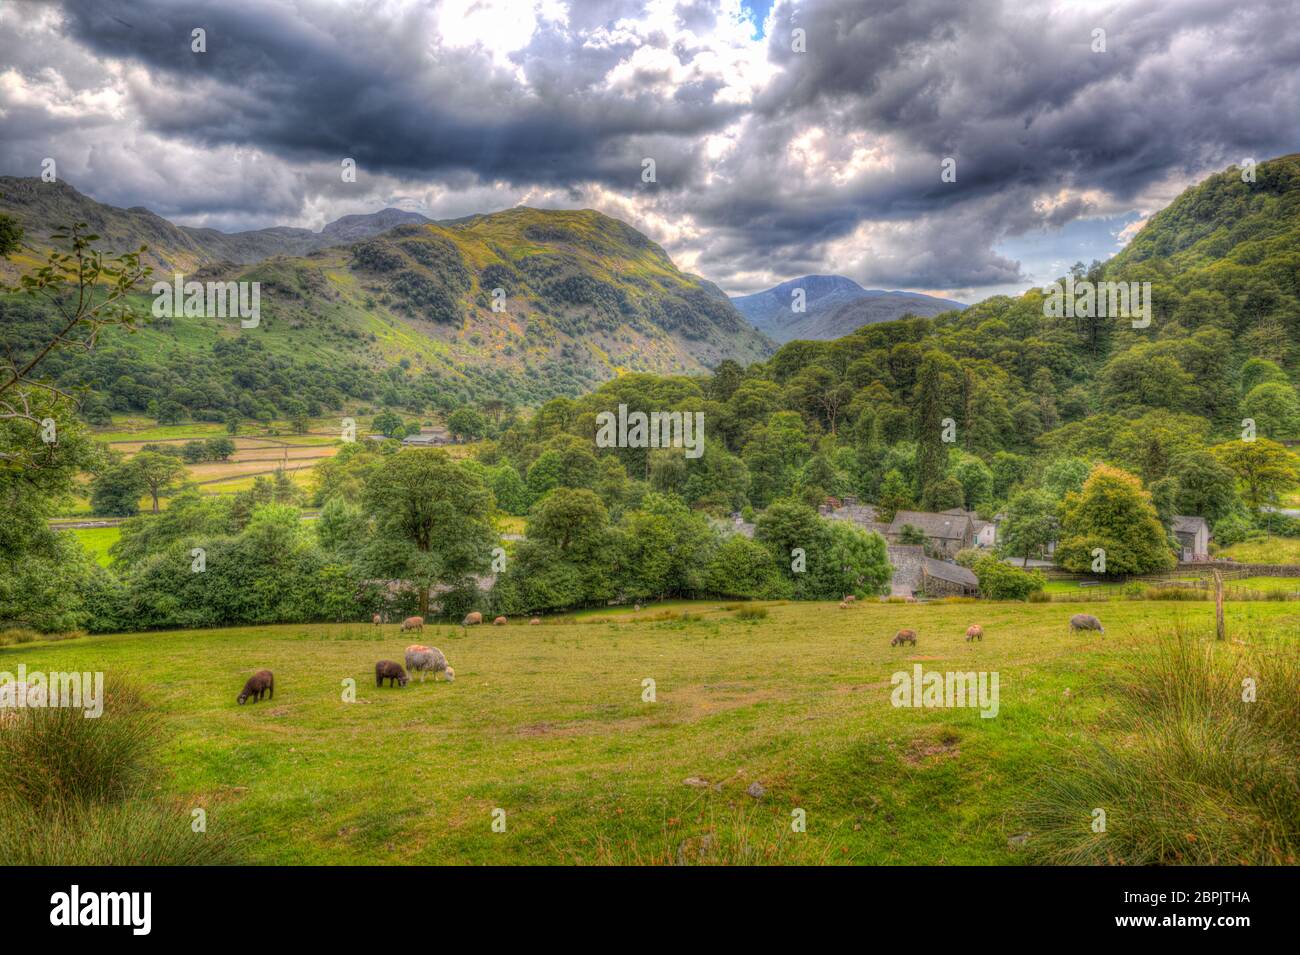 Dark sky and country scene of sheep in field at Seatoller Lake District Cumbria England UK Stock Photo